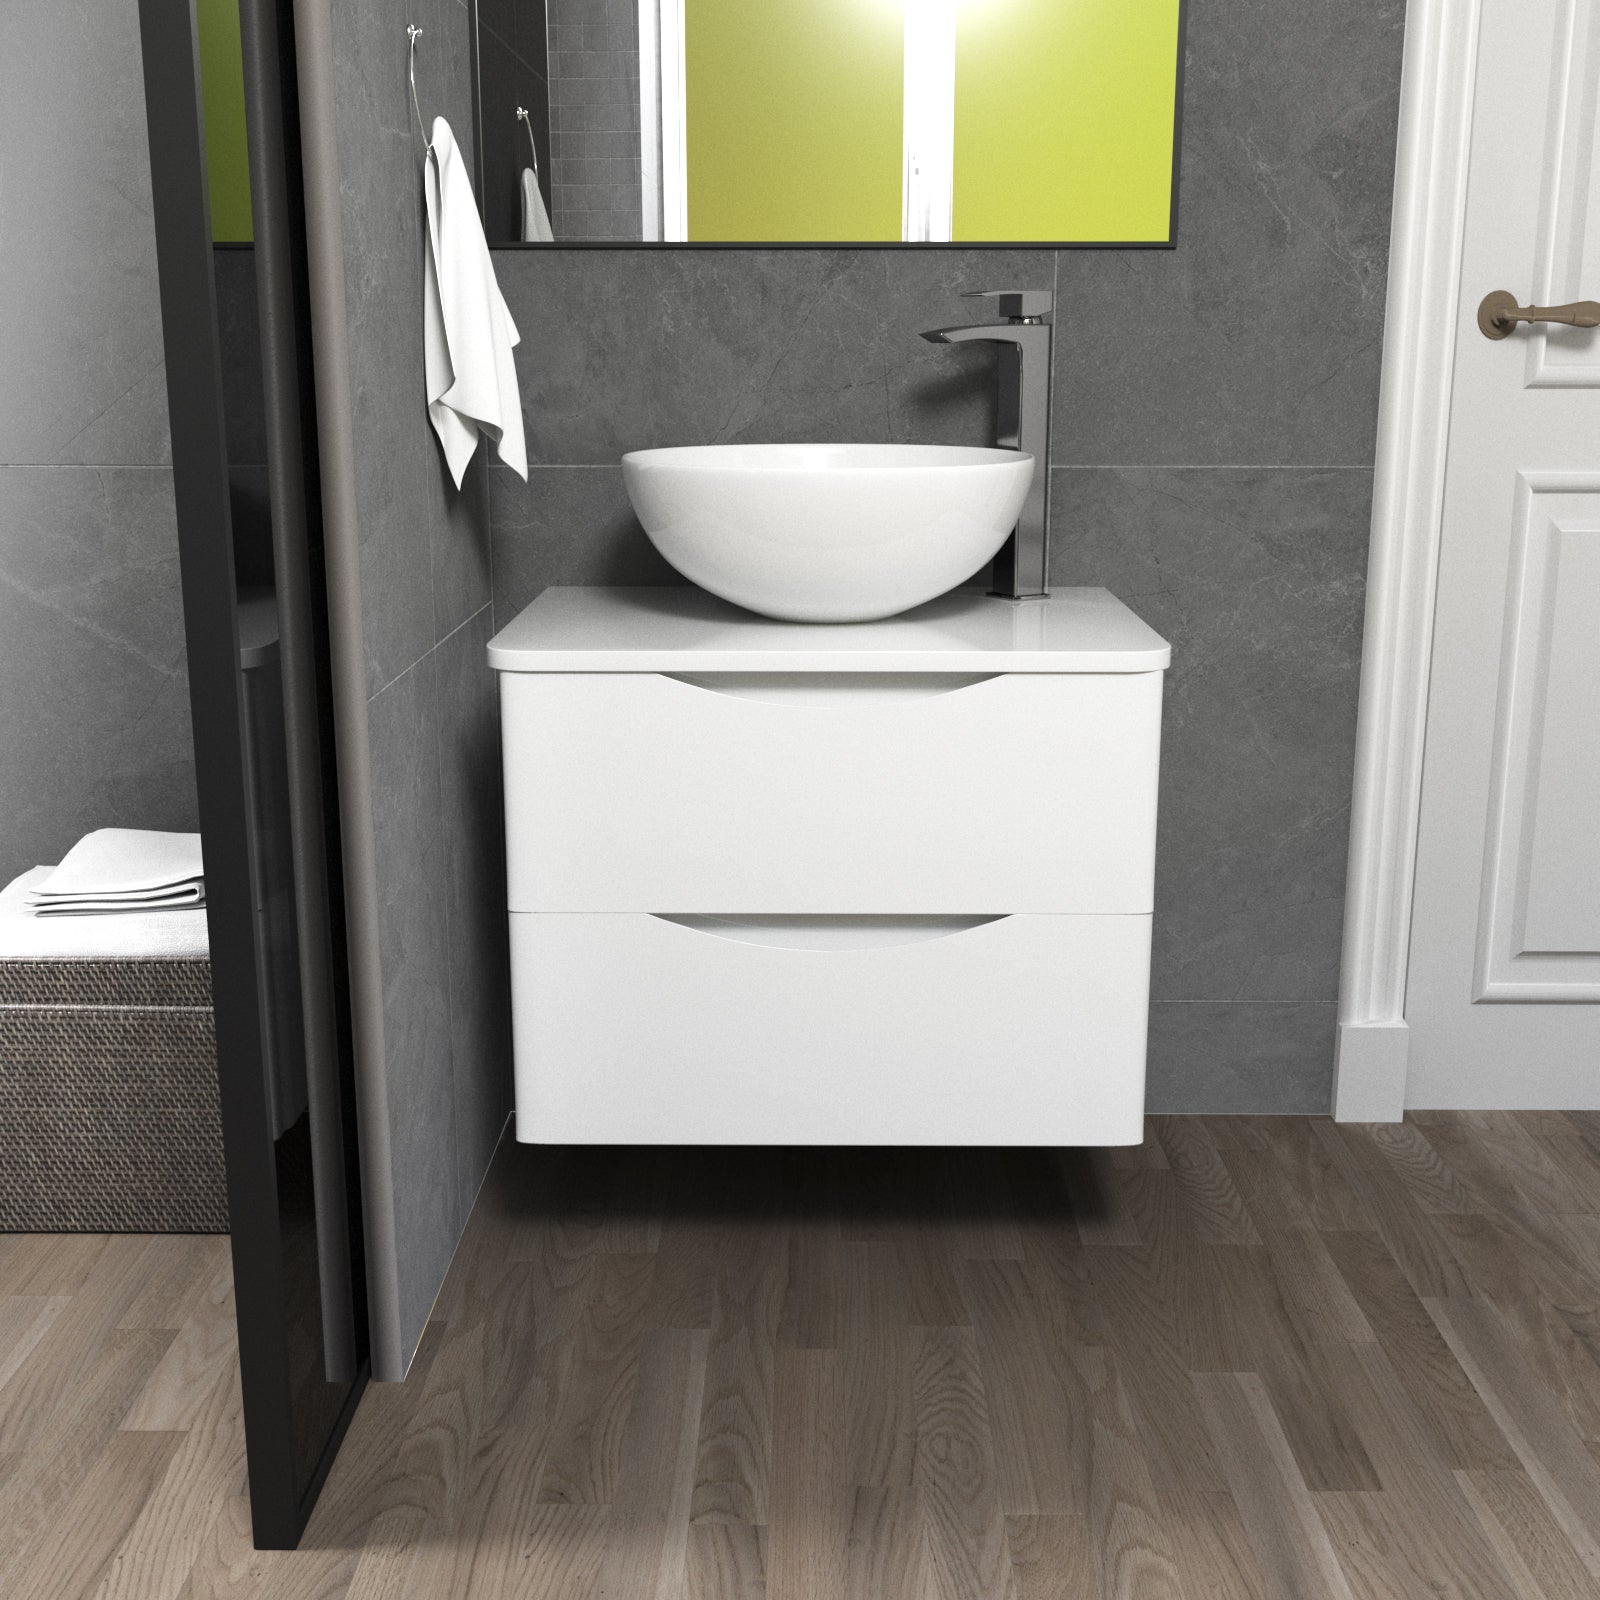 Merton White 600mm Bathroom Wall Hung Vanity Unit With Round Ceramic Countertop 420mm Basin